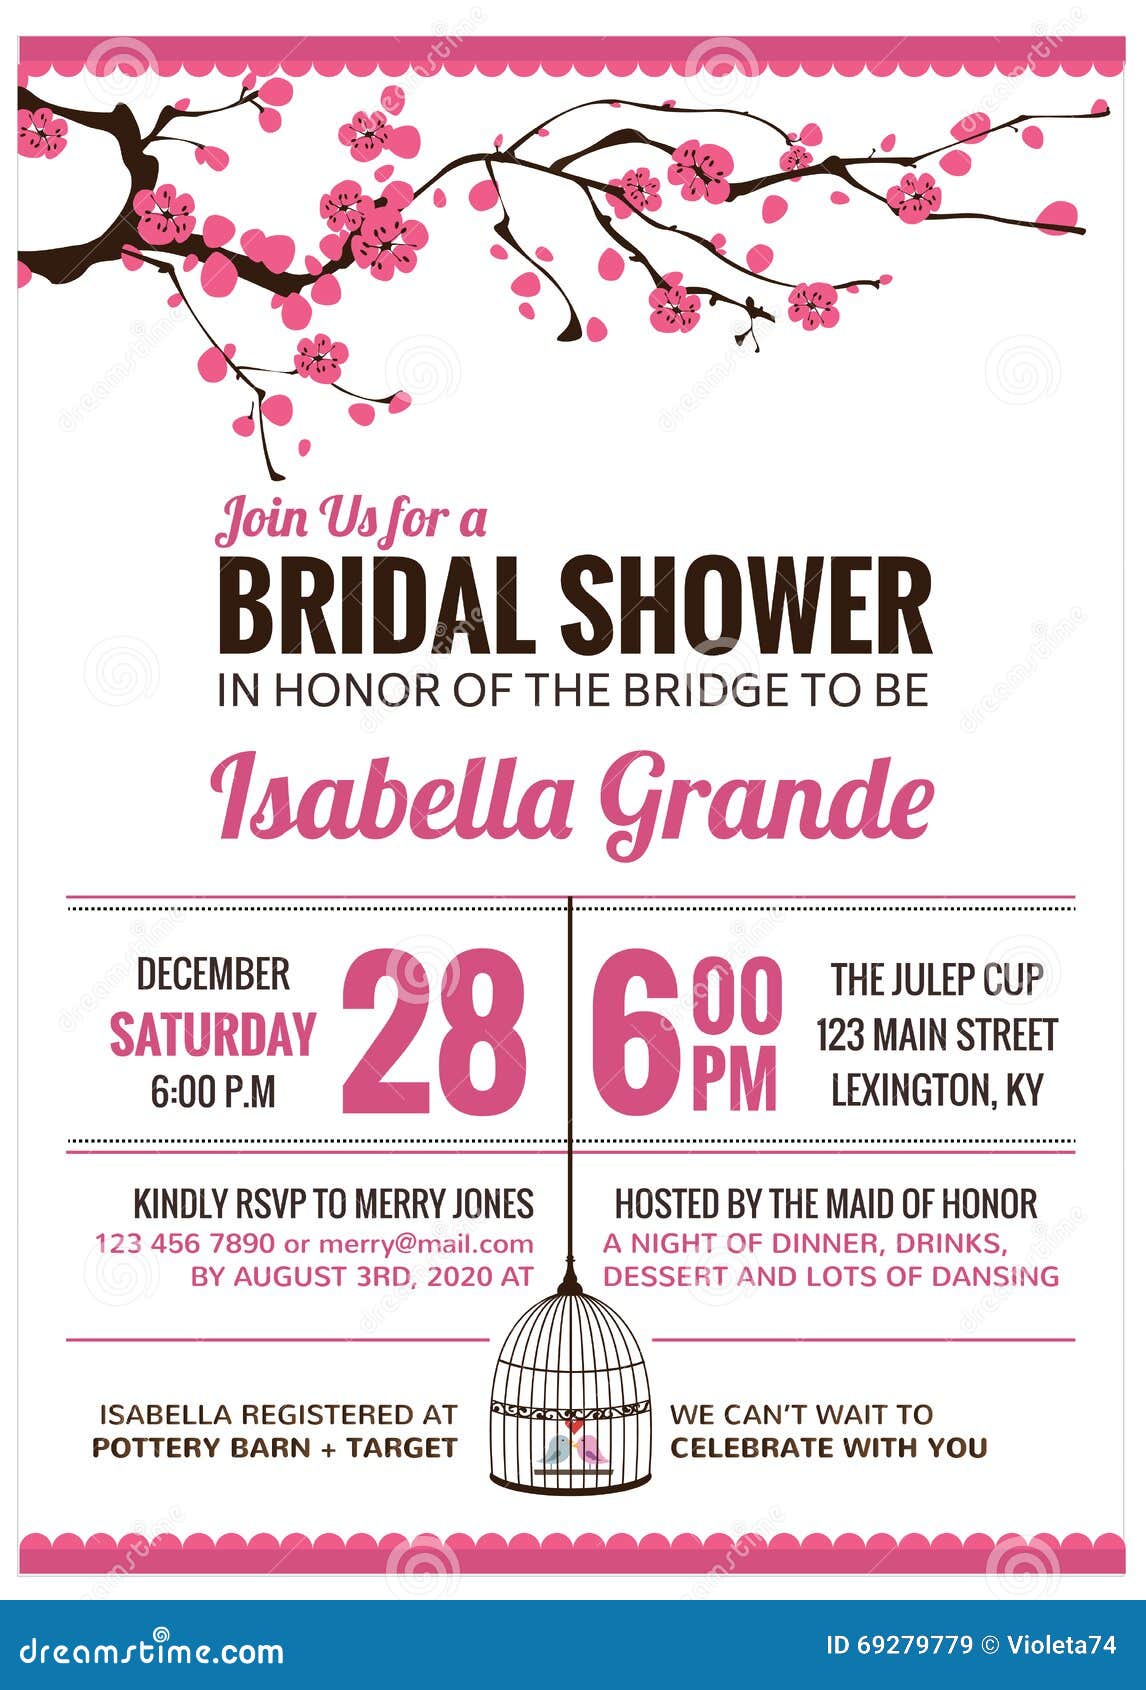 bridal shower invitation card with cherry blossom